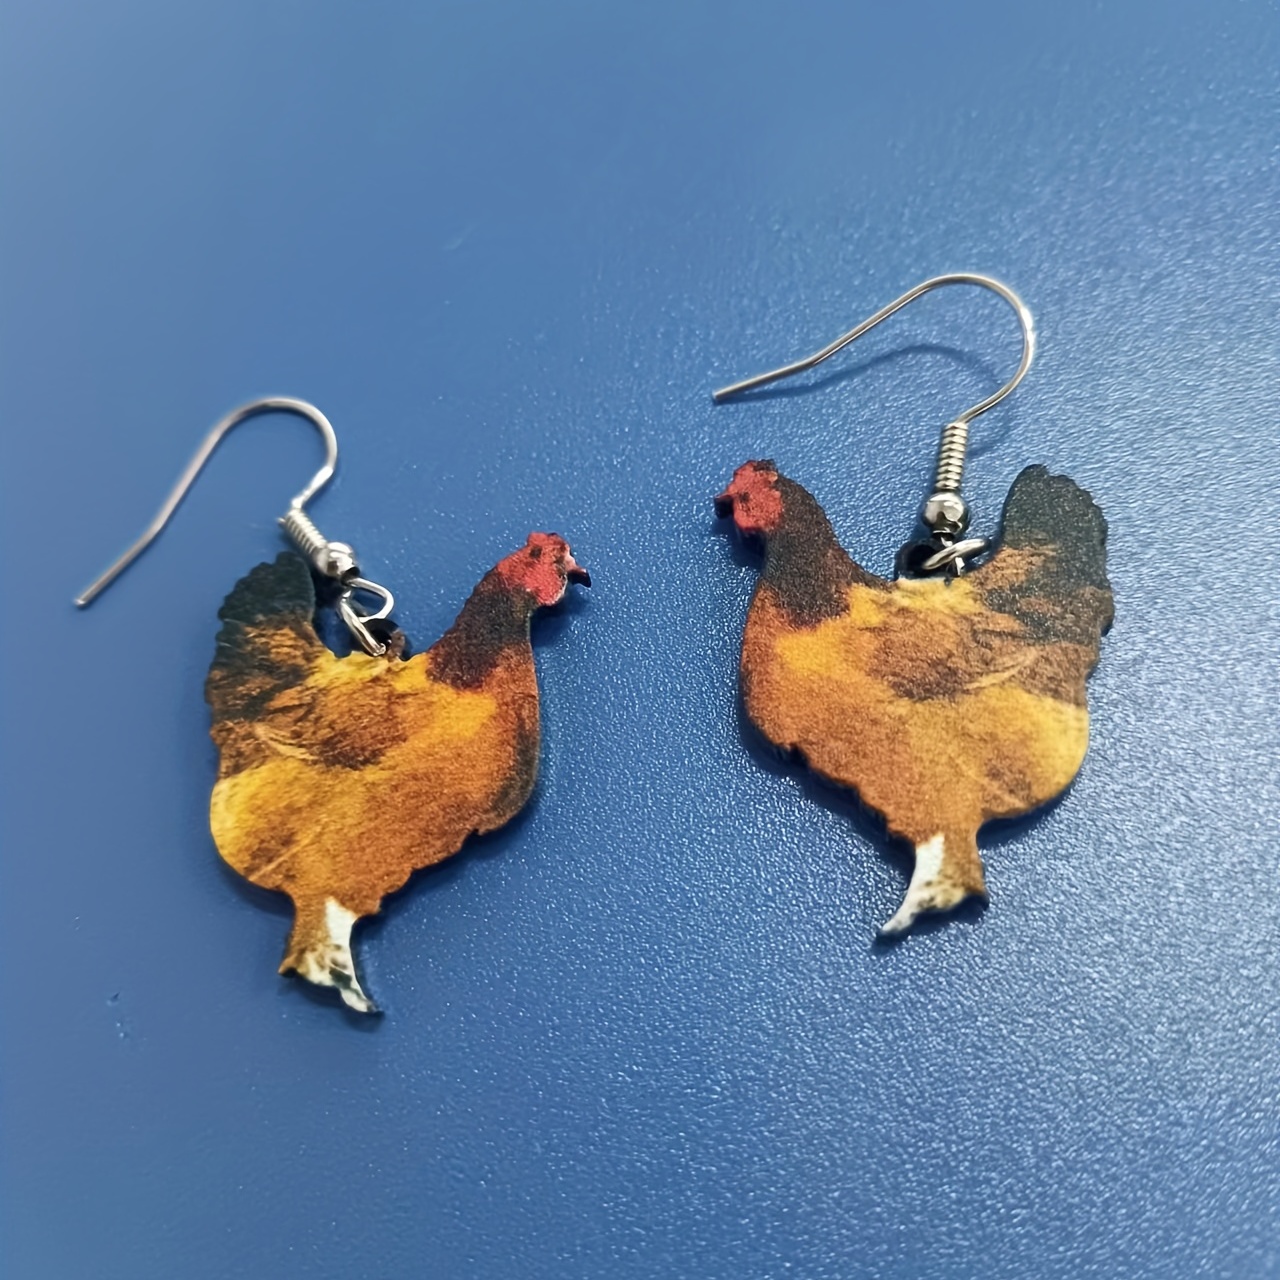 Acrylic Colorful Rooster Chicken Earrings Dangle Drop Farm Animals Jewelry  Gifts